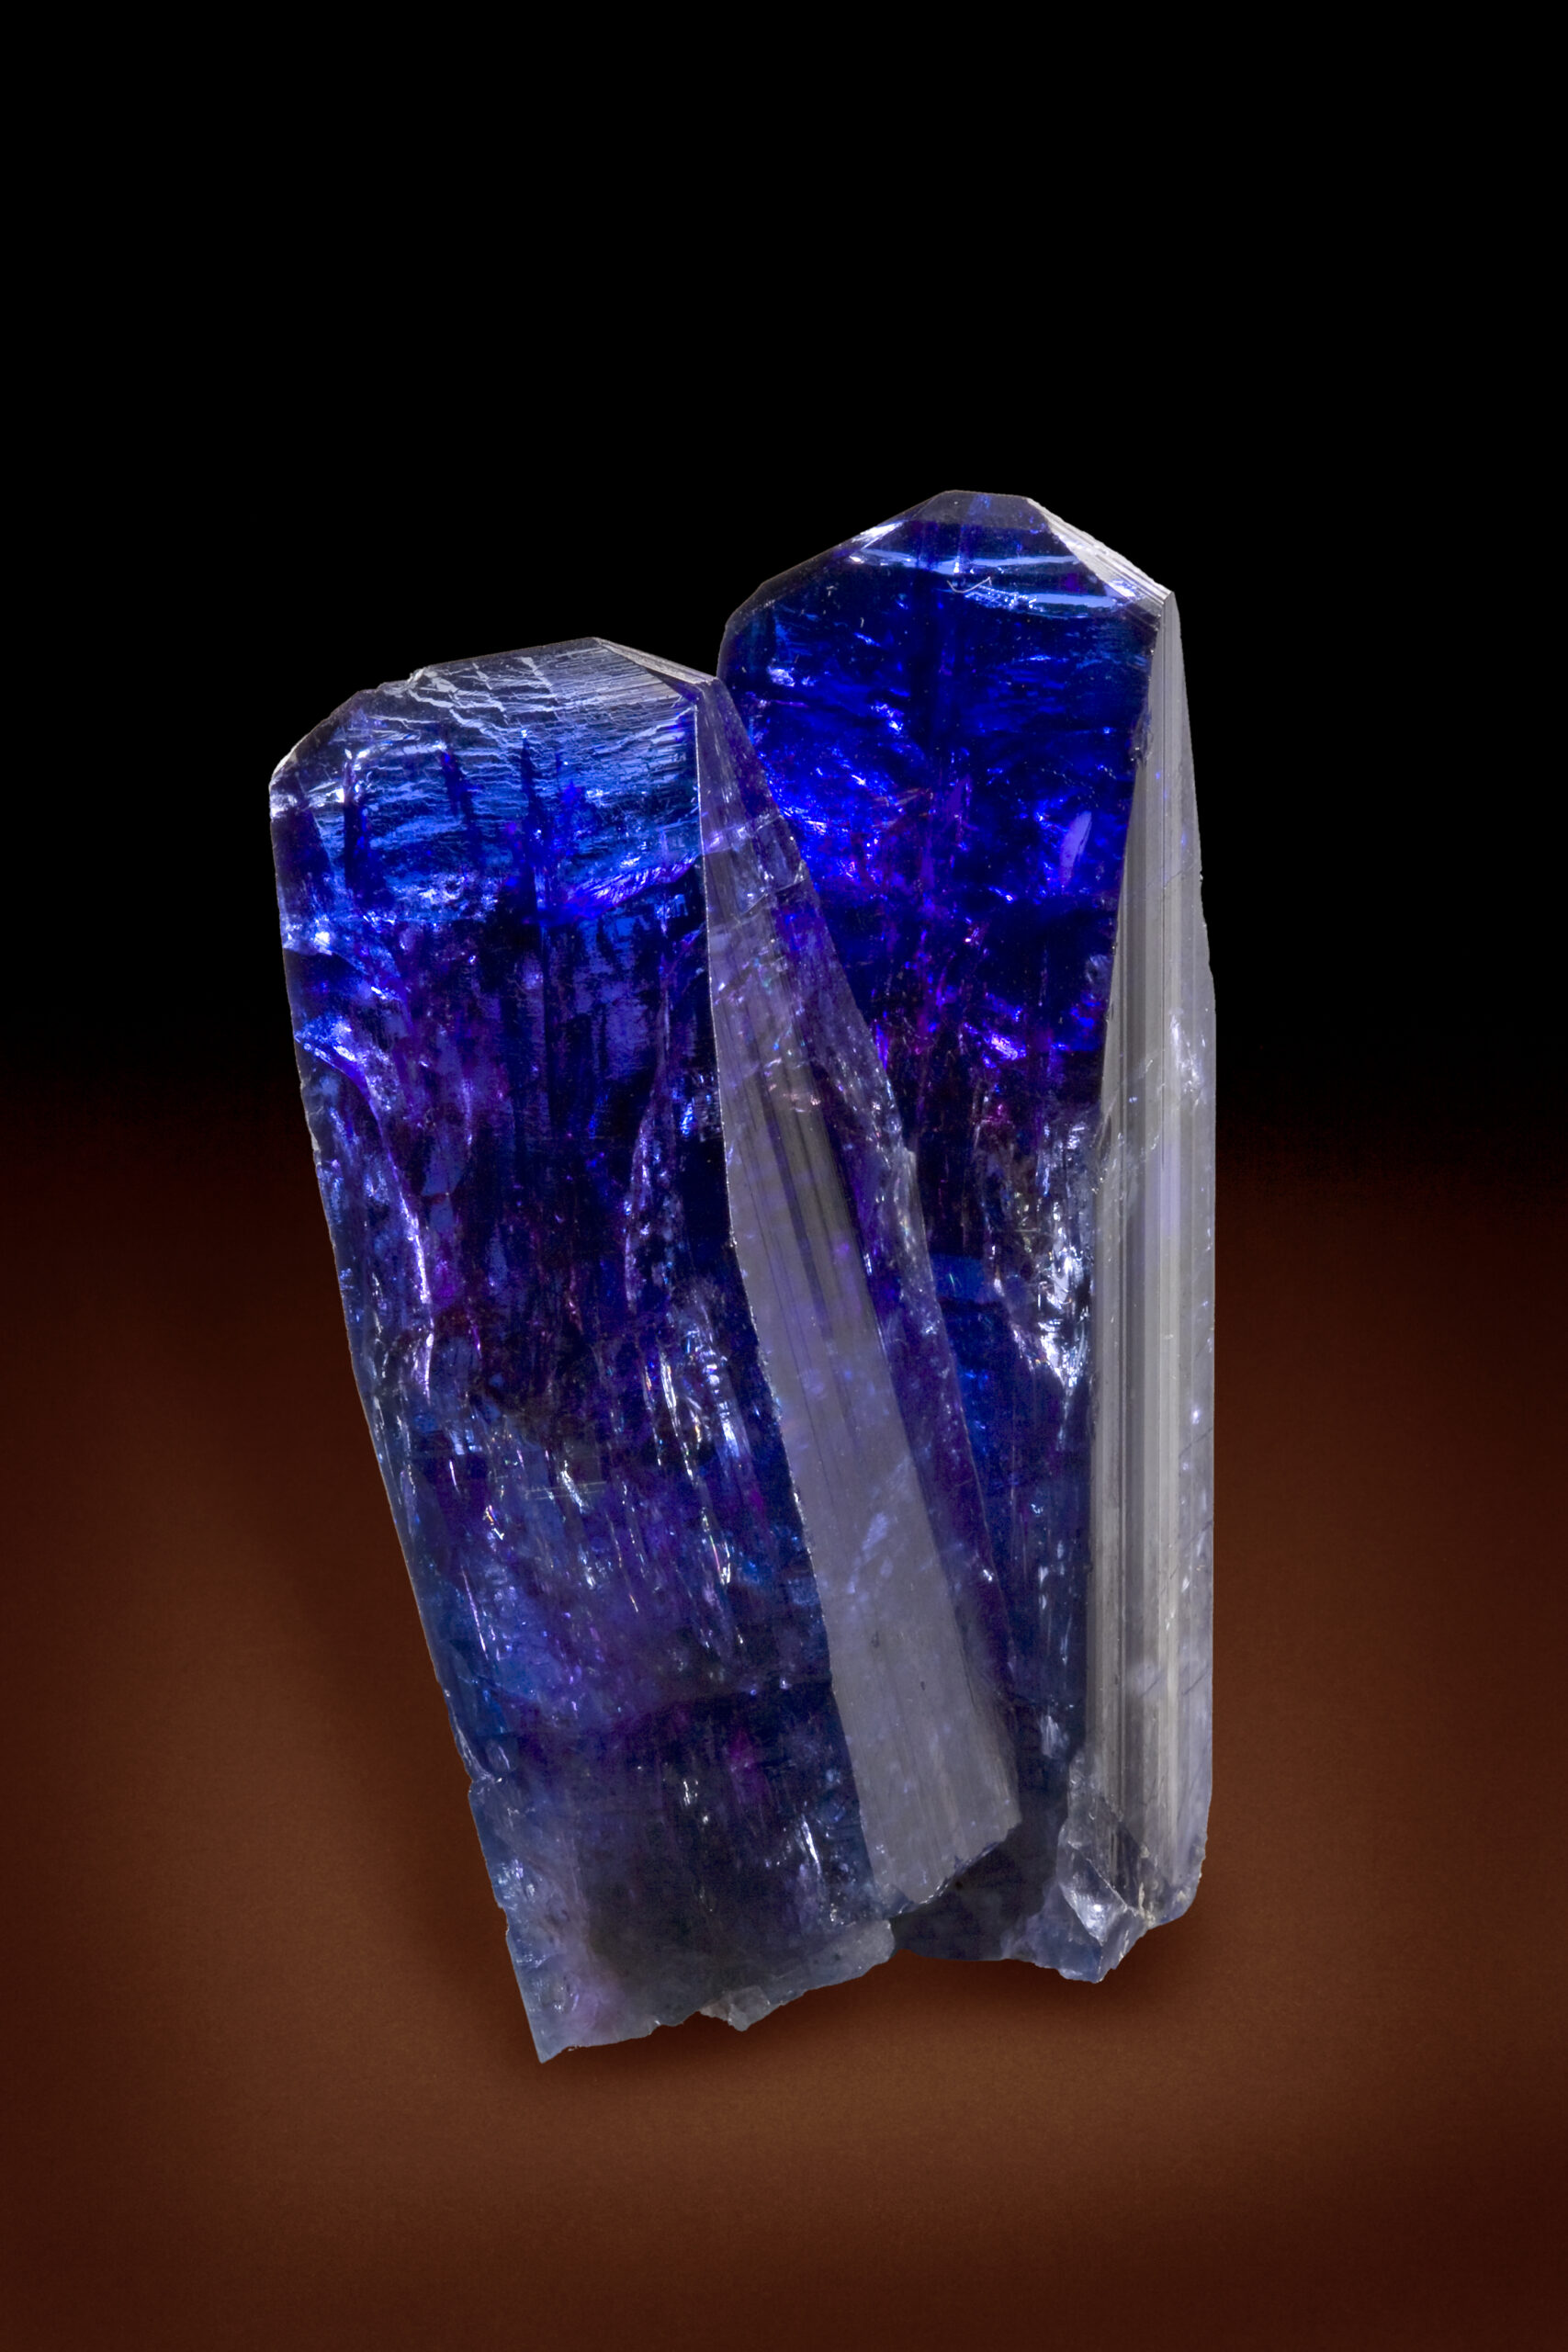 A tanzanite crystal in the context of tanzanite metaphysical properties